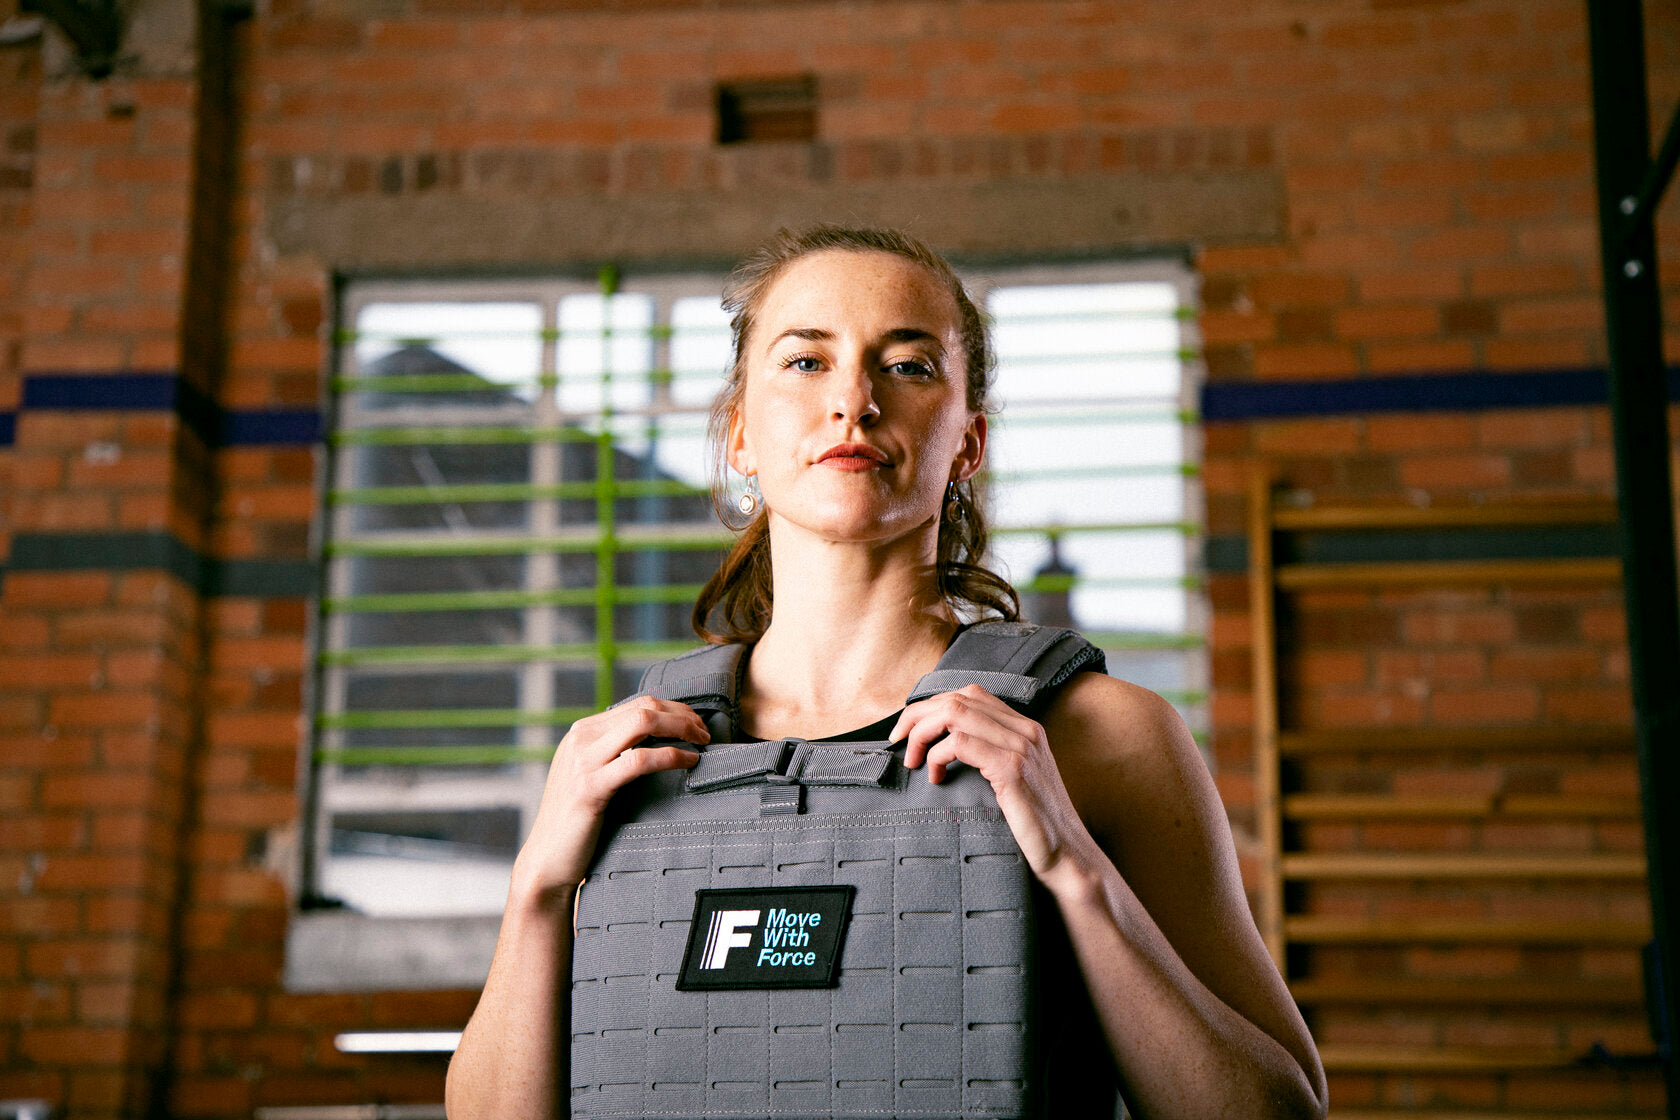 How to Add a Weighted Vest to Your Workouts at Home